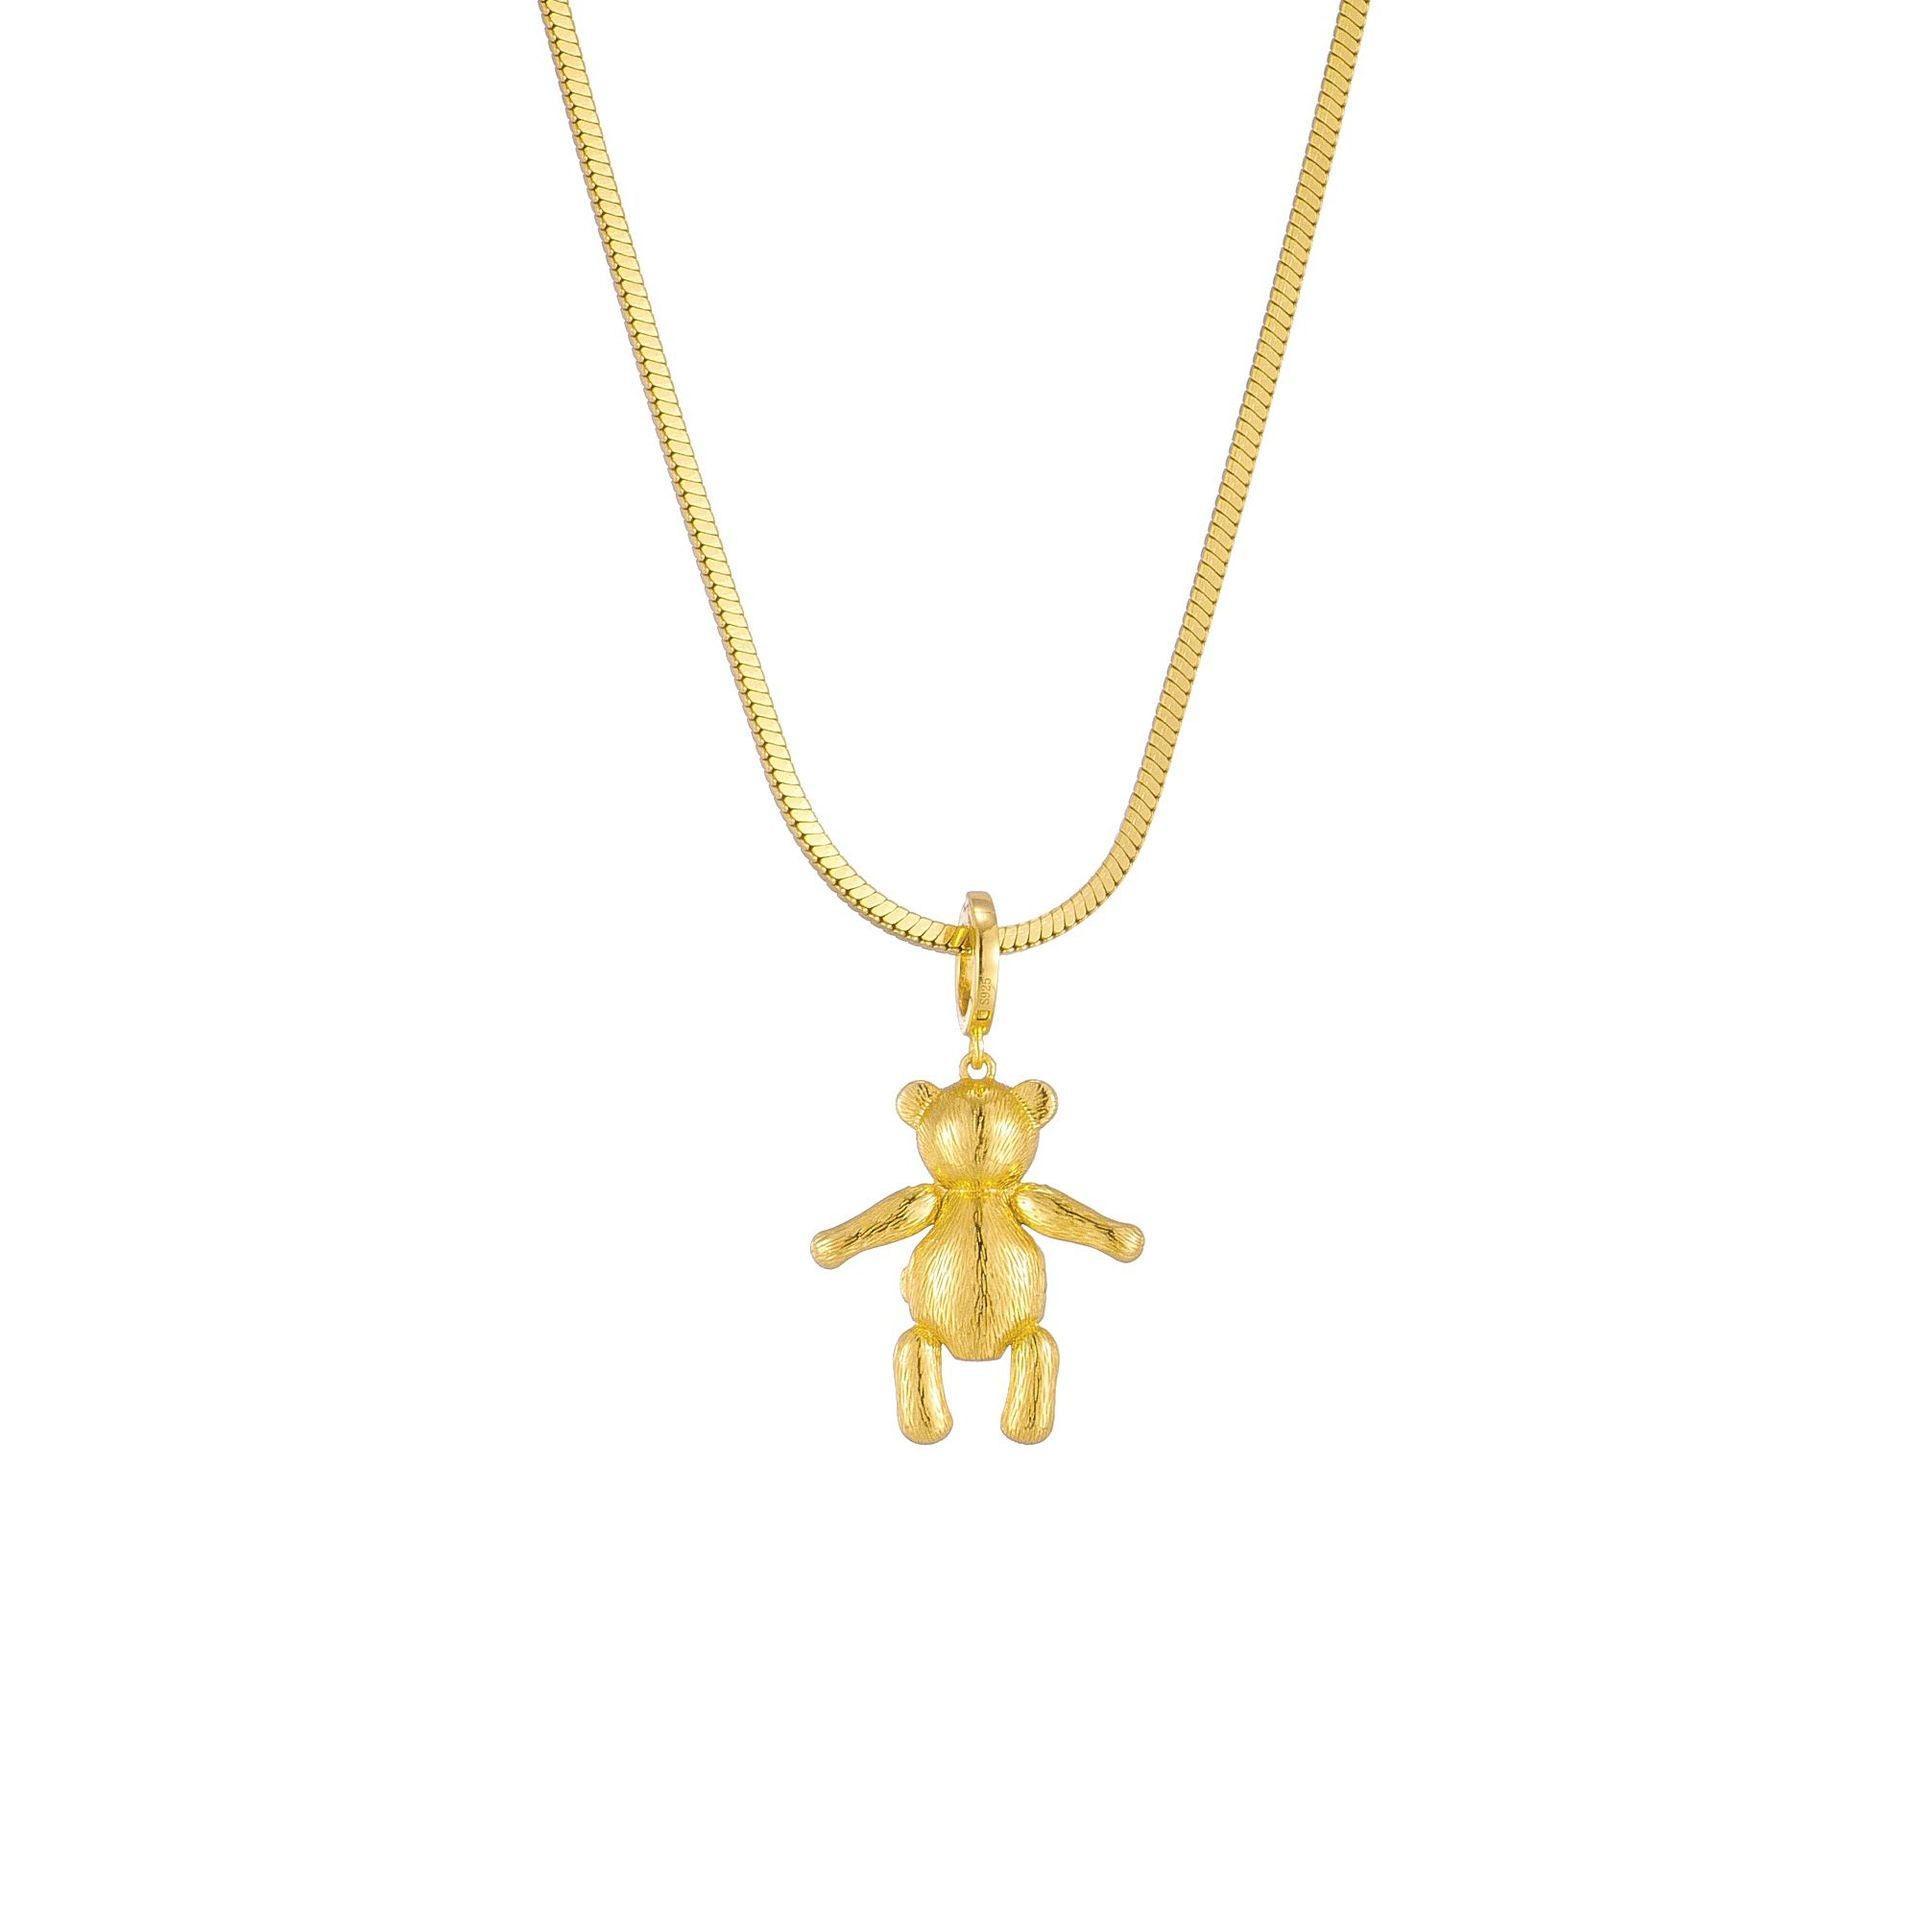 Fashionable New Cute Bear Pendant Necklace in 2023 | Fashionable New Cute Bear Pendant Necklace - undefined | Bear Necklace, Cute Bear Pendant Necklace, Gift Necklace, Necklaces | From Hunny Life | hunnylife.com